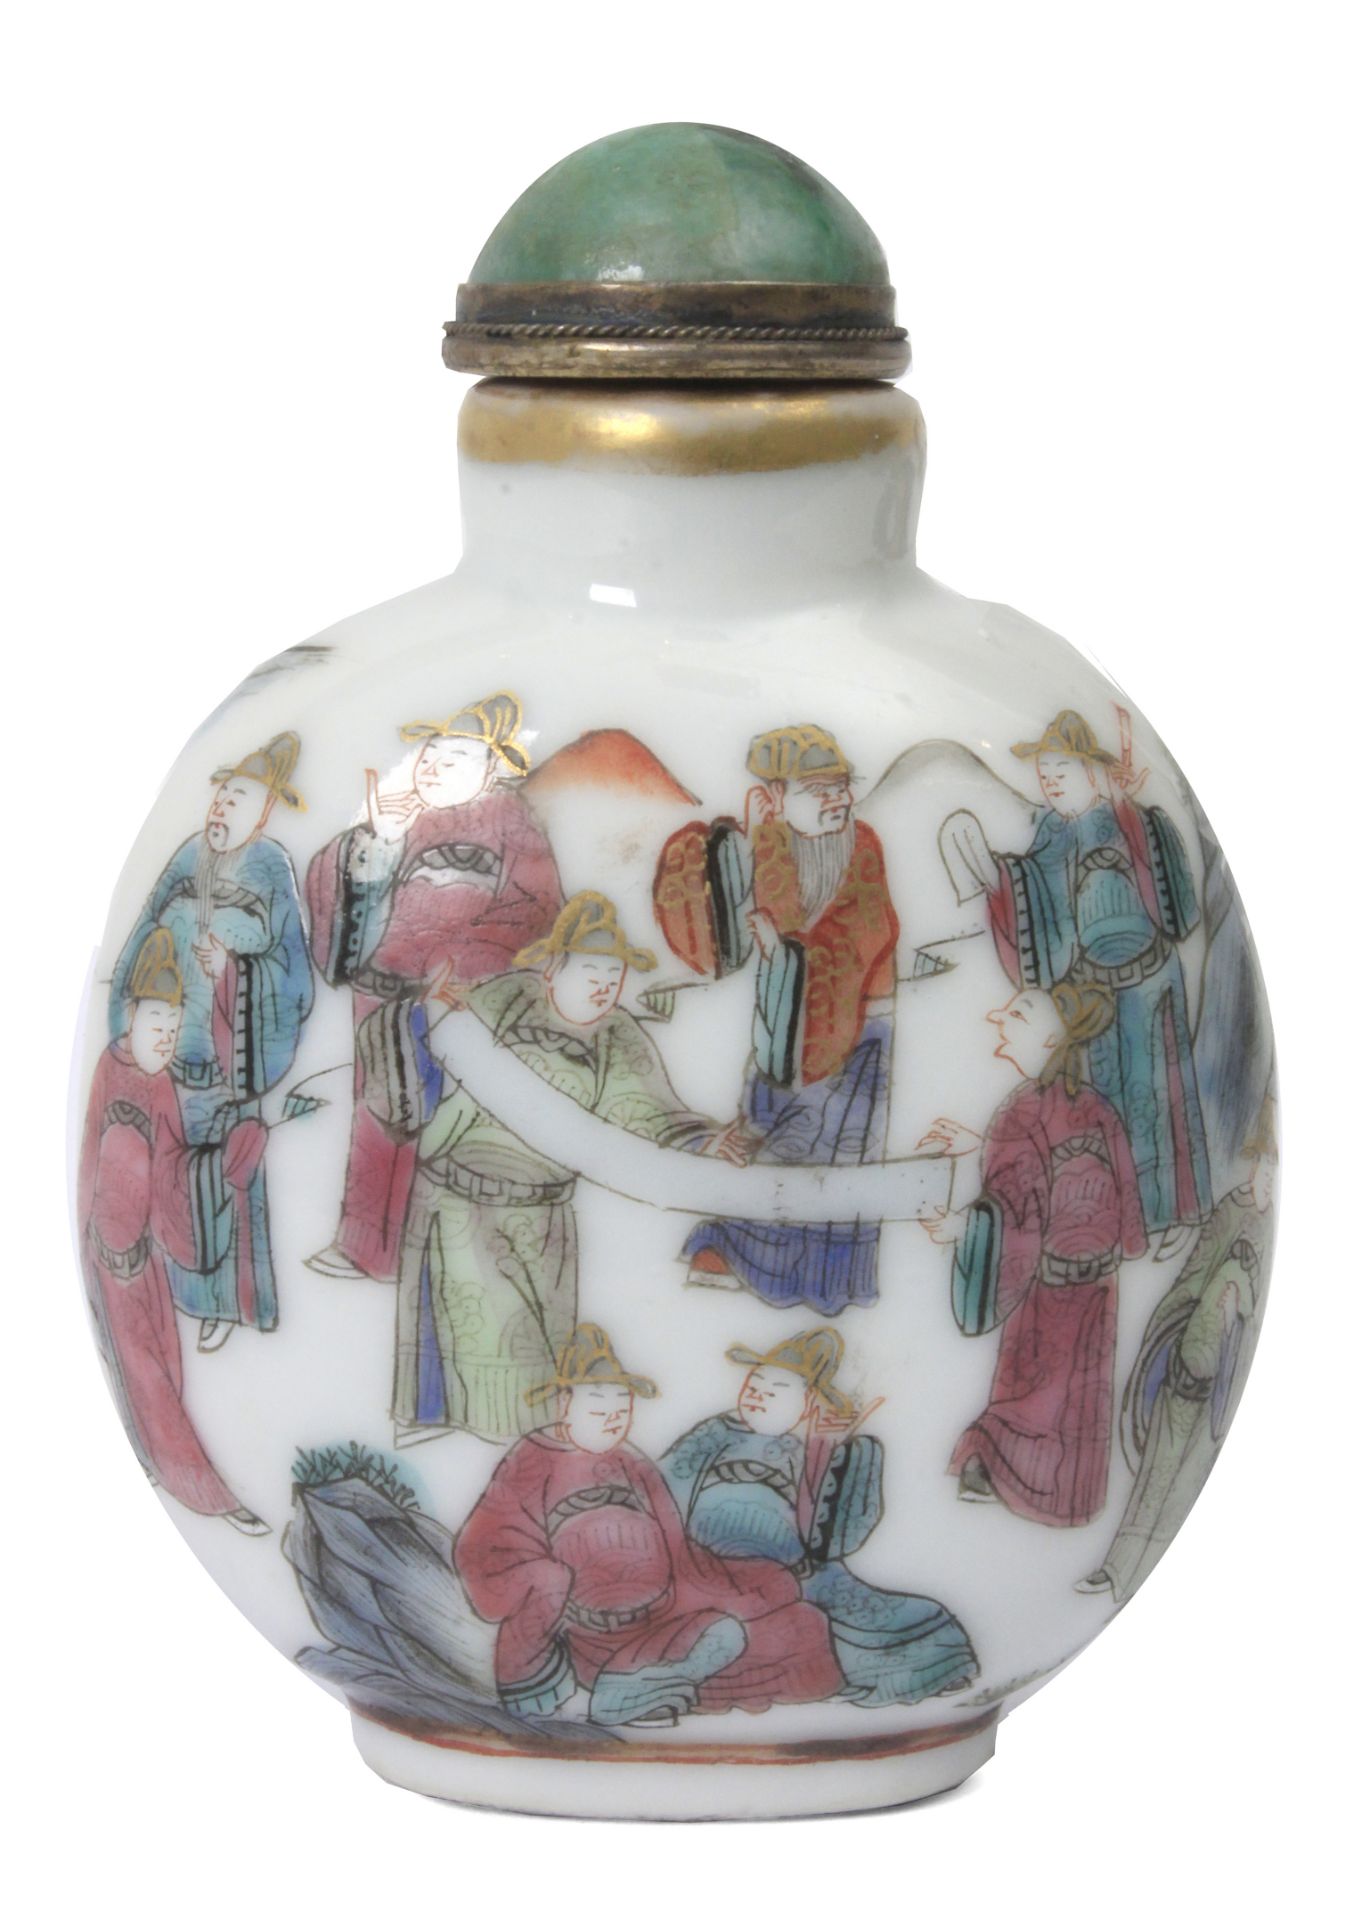 A 19th century Chinese porcelain snuff bottle from the DaoGuang period